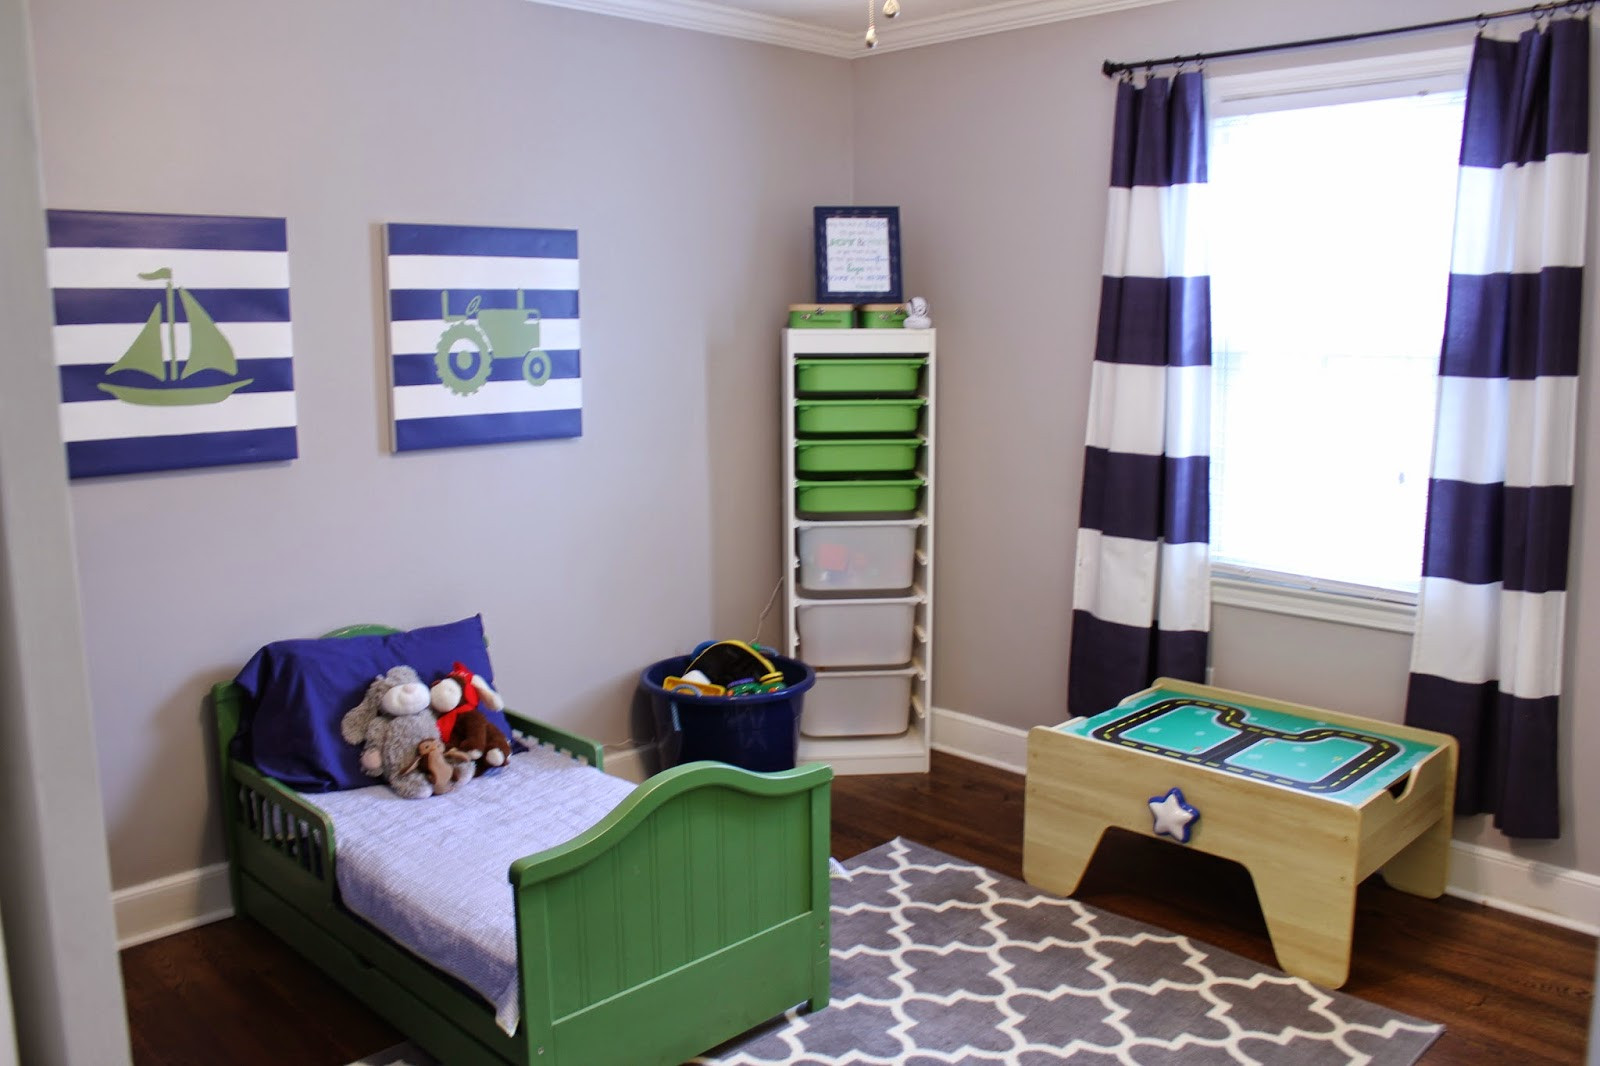 Toddler Boys Bedroom Themes
 Toddler Room Ideas for Boy – Finding the perfect Room